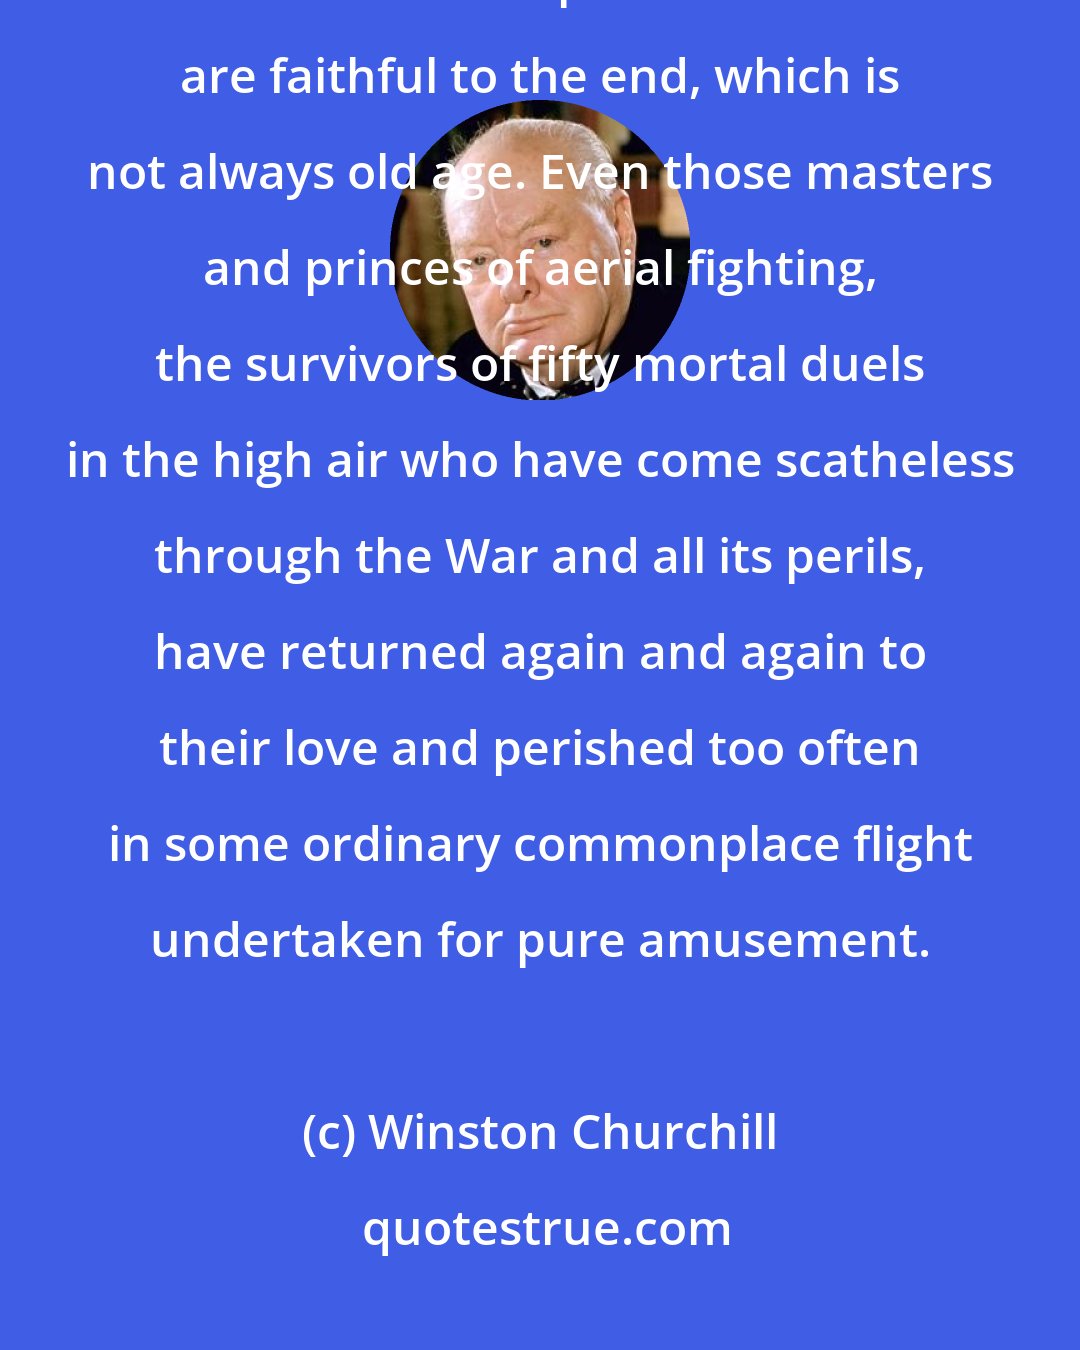 Winston Churchill: The air is an extremely dangerous, jealous and exacting mistress. Once under the spell most lovers are faithful to the end, which is not always old age. Even those masters and princes of aerial fighting, the survivors of fifty mortal duels in the high air who have come scatheless through the War and all its perils, have returned again and again to their love and perished too often in some ordinary commonplace flight undertaken for pure amusement.